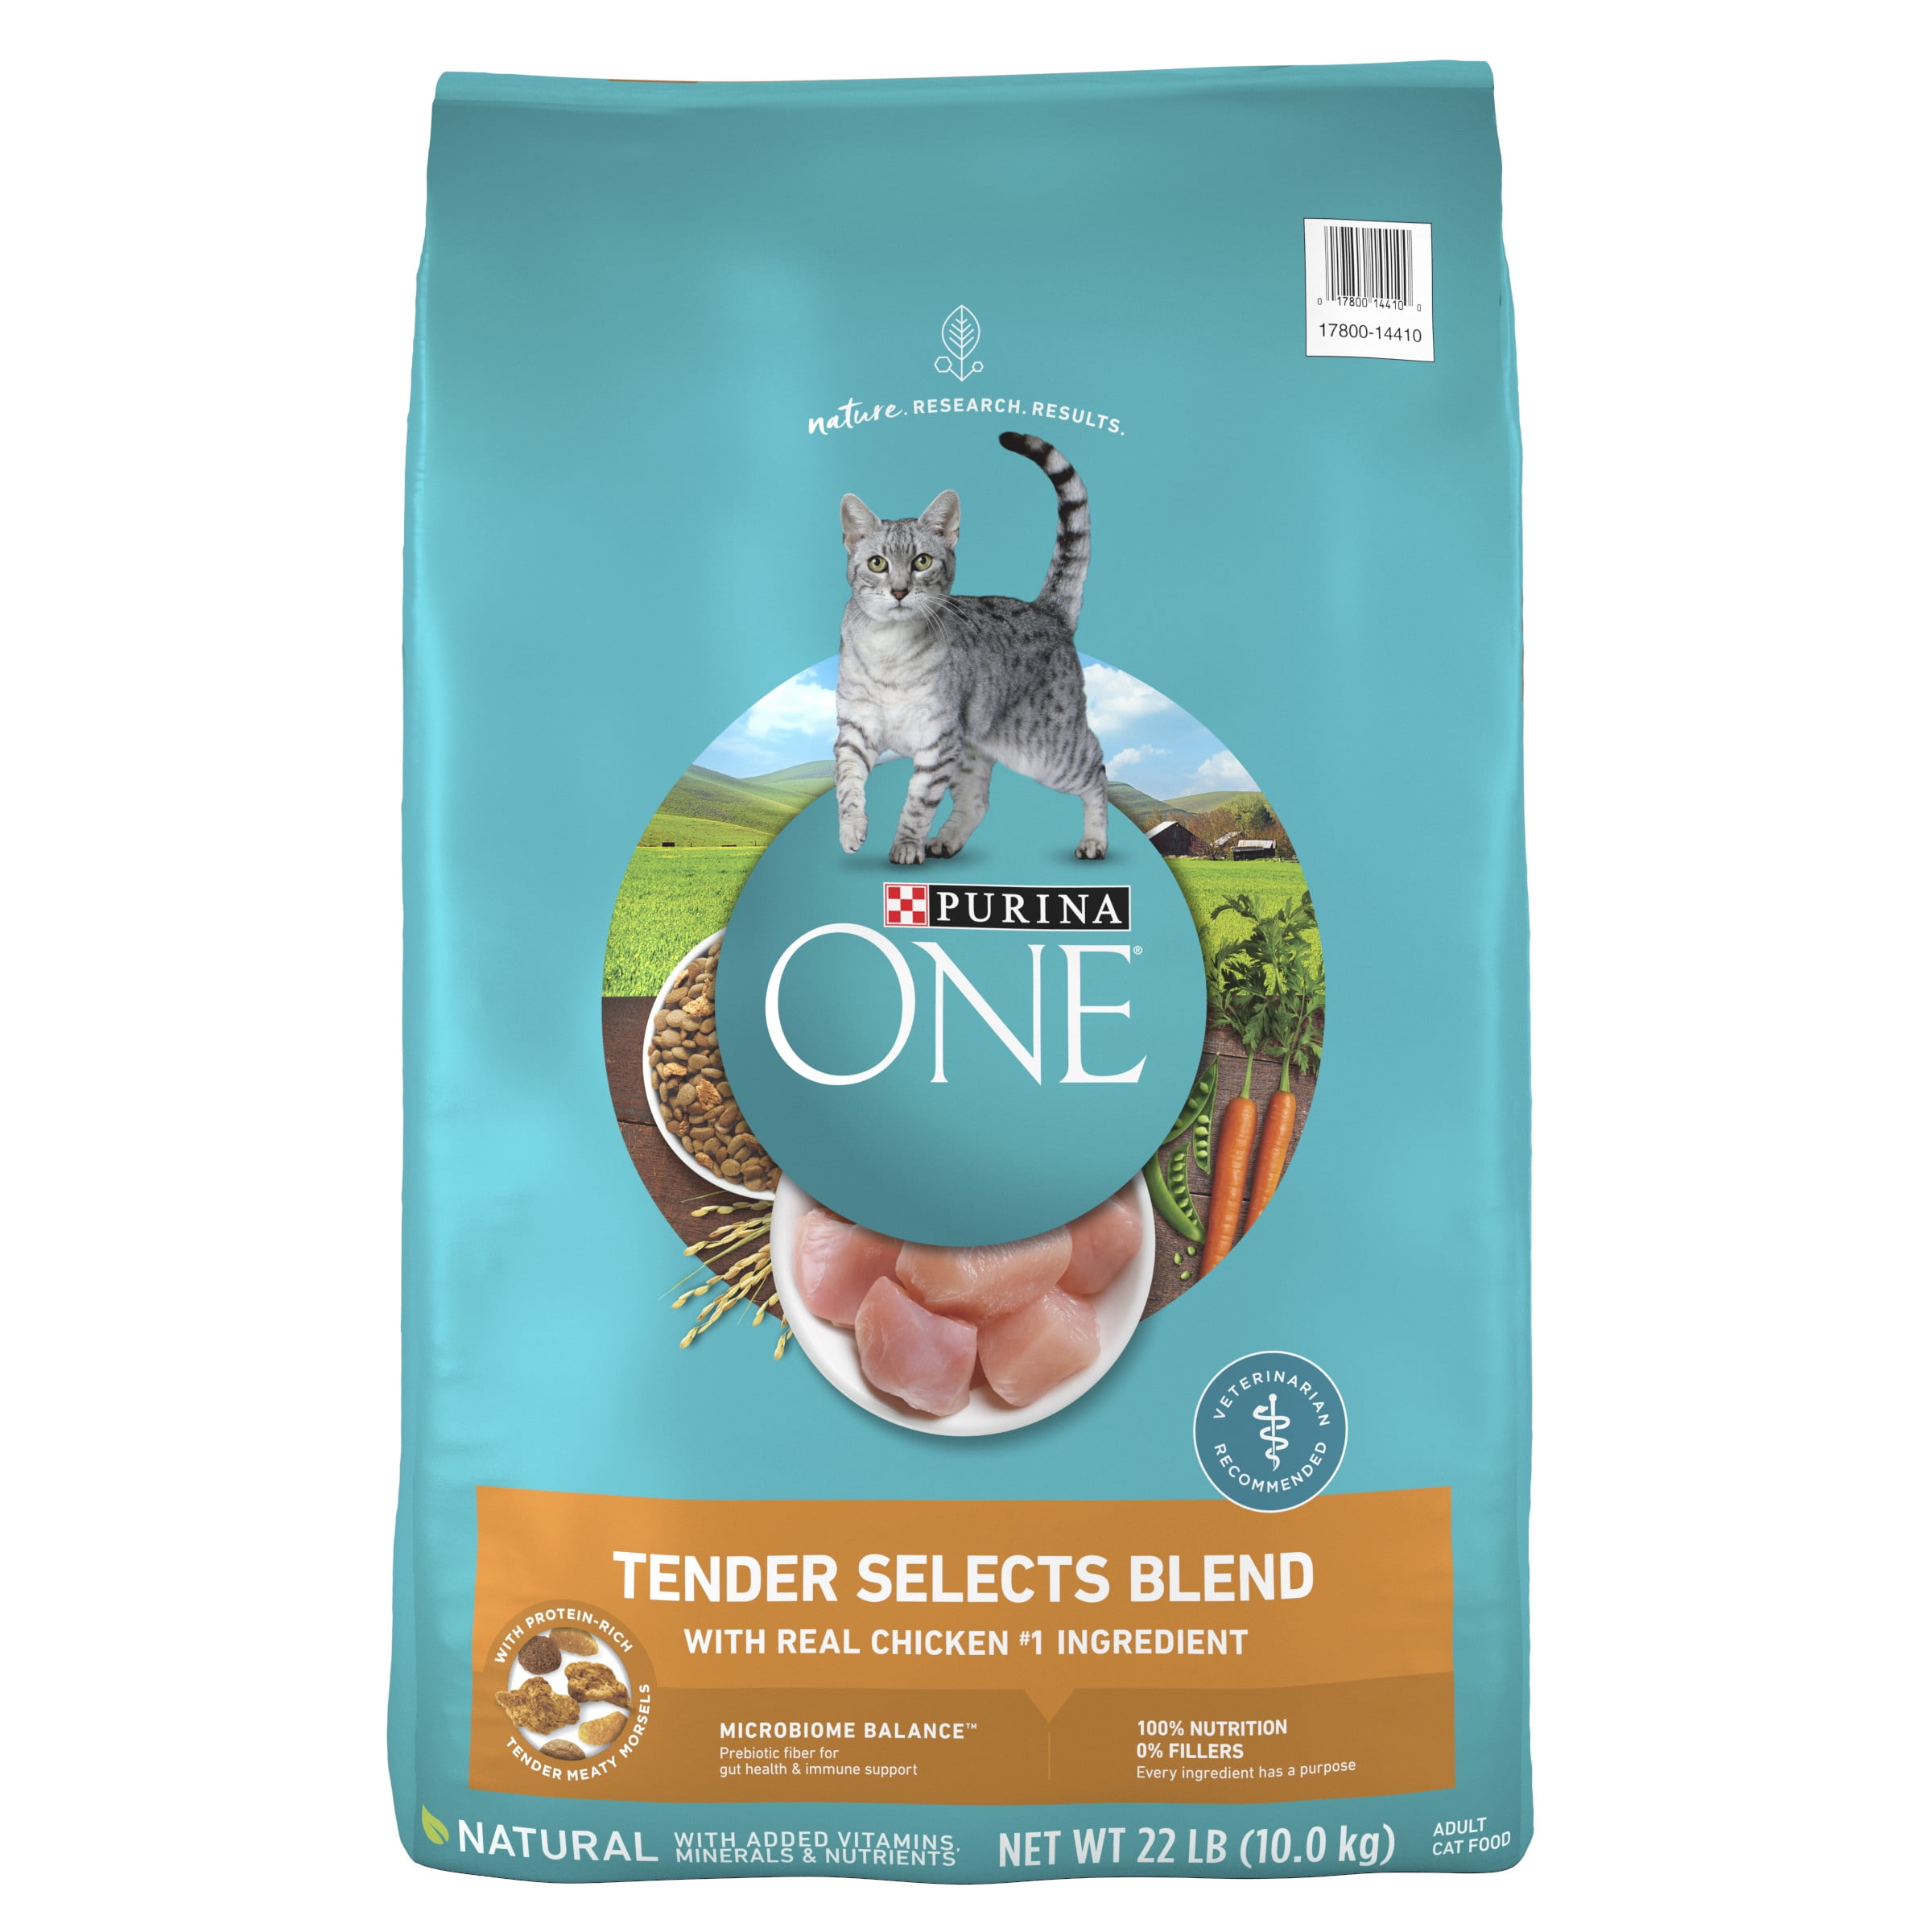 Purina One Tender Selects Blend Dry Cat Food Chicken, 22 lb Bag -  